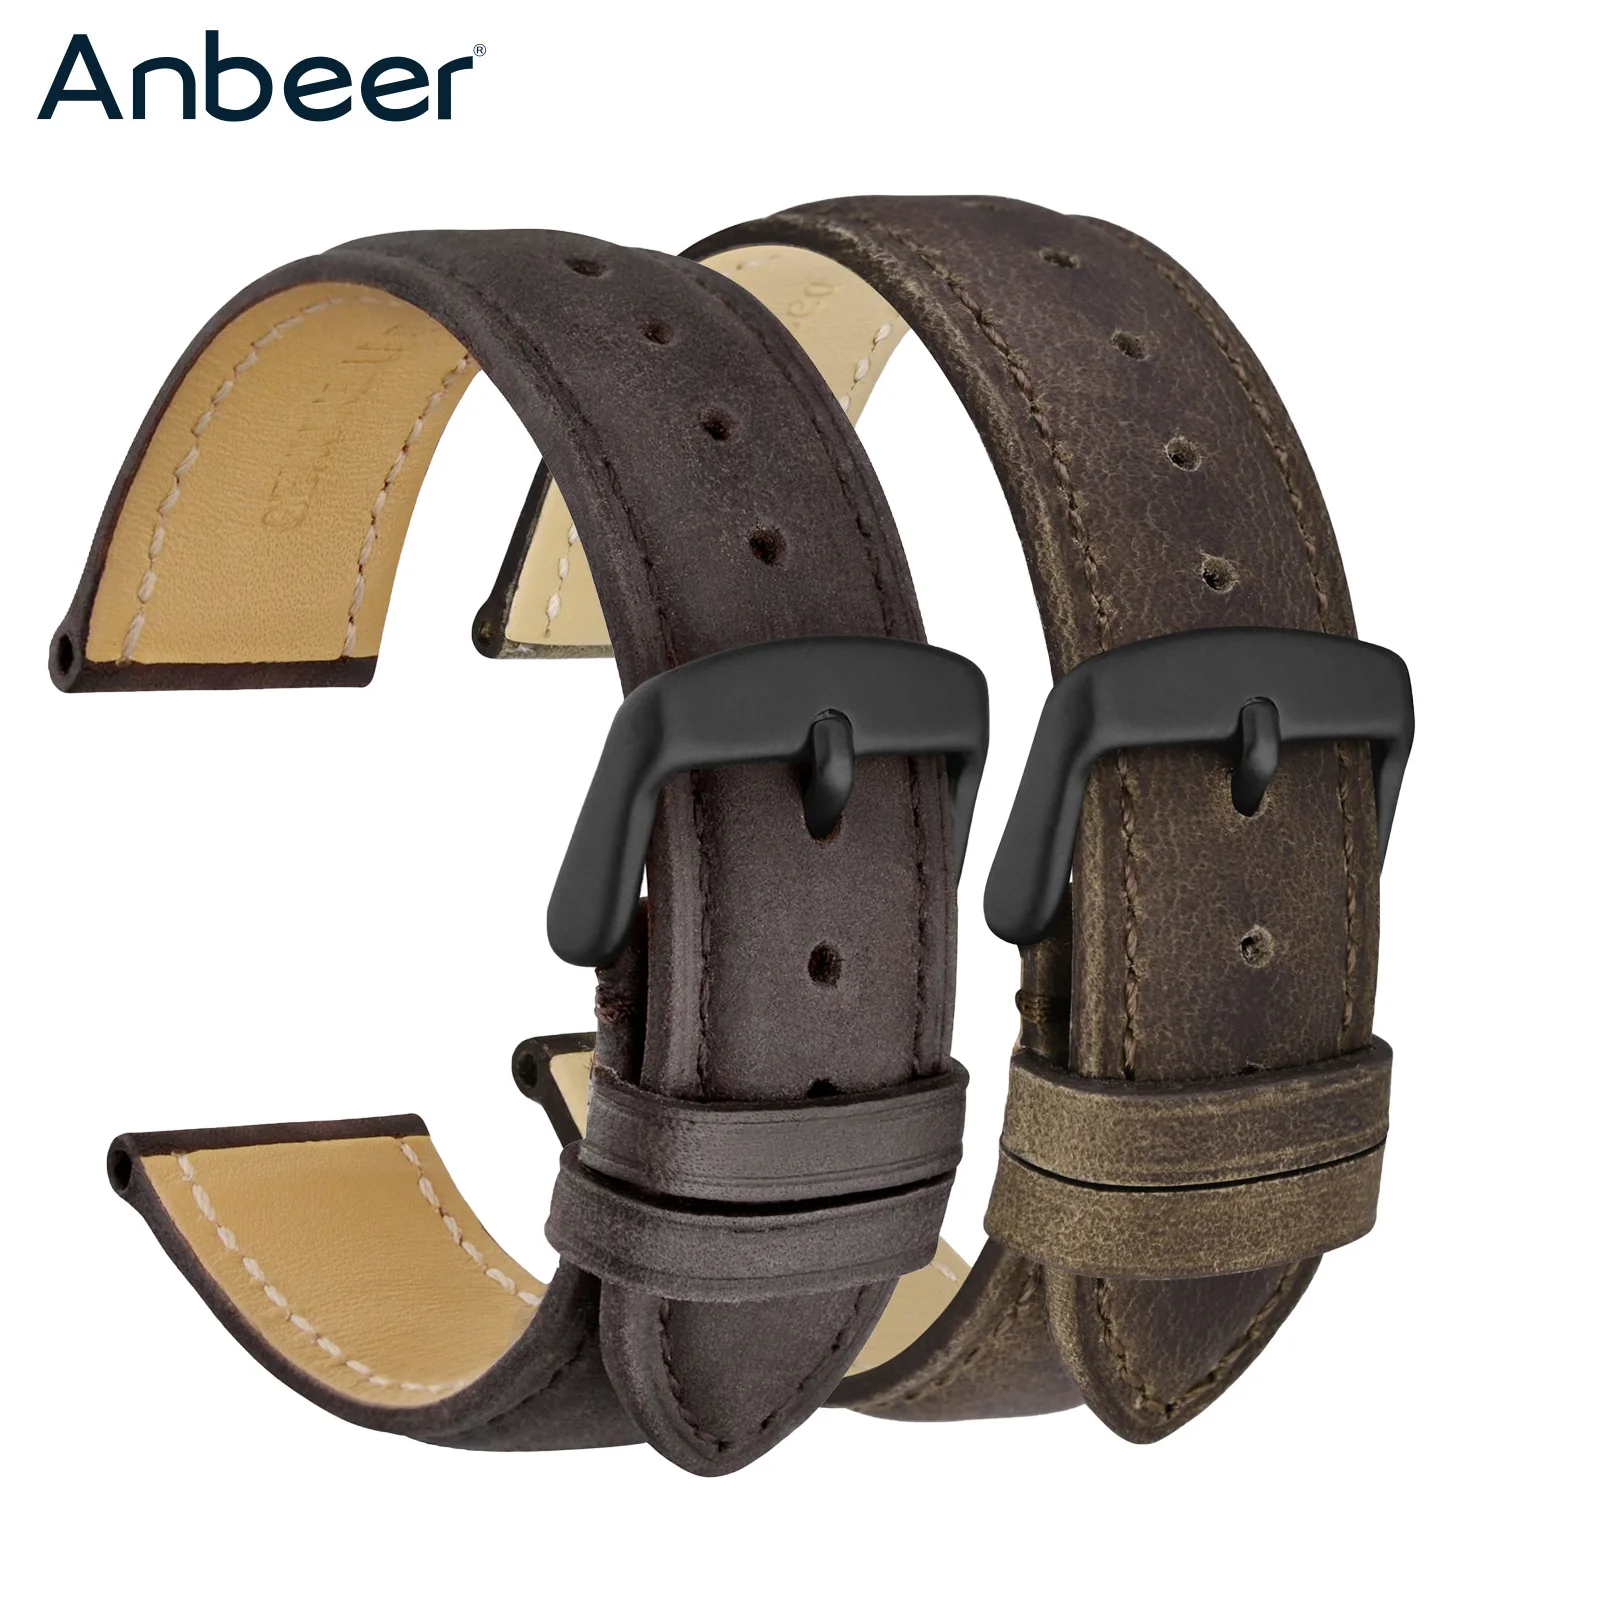 

Anbeer Leather Watch Bands 18mm 19mm 20mm 22mm 23mm 24mm Watchstraps Crazy Horse Vintage Appearance Replacement Bracelet